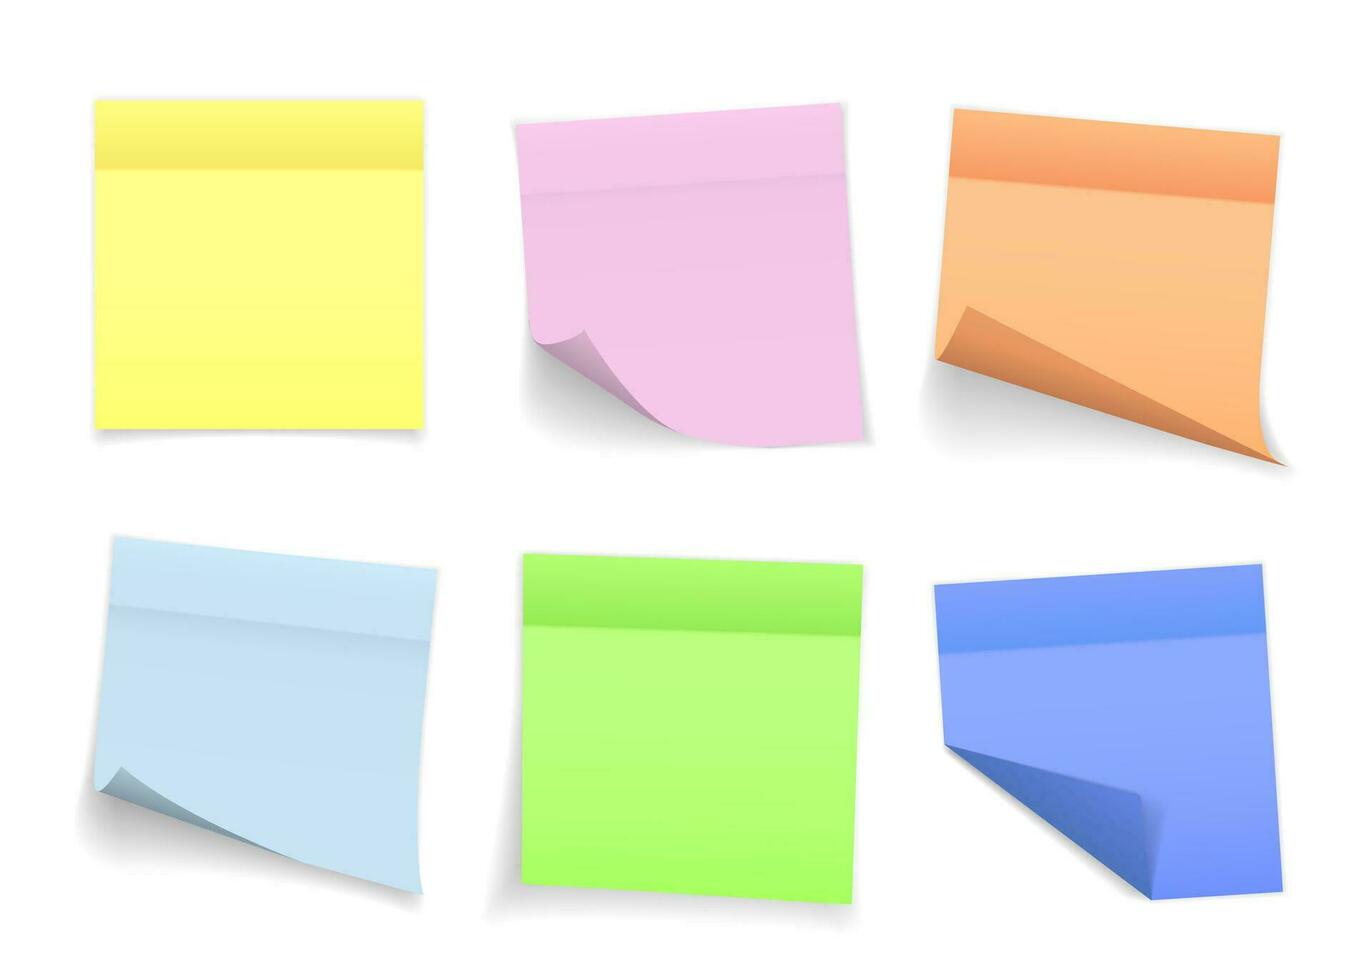 Collection of different colored sheets of note papers with curled corner and shadow, ready for your message. Realistic. Isolated on white background. Set. Vector illustration